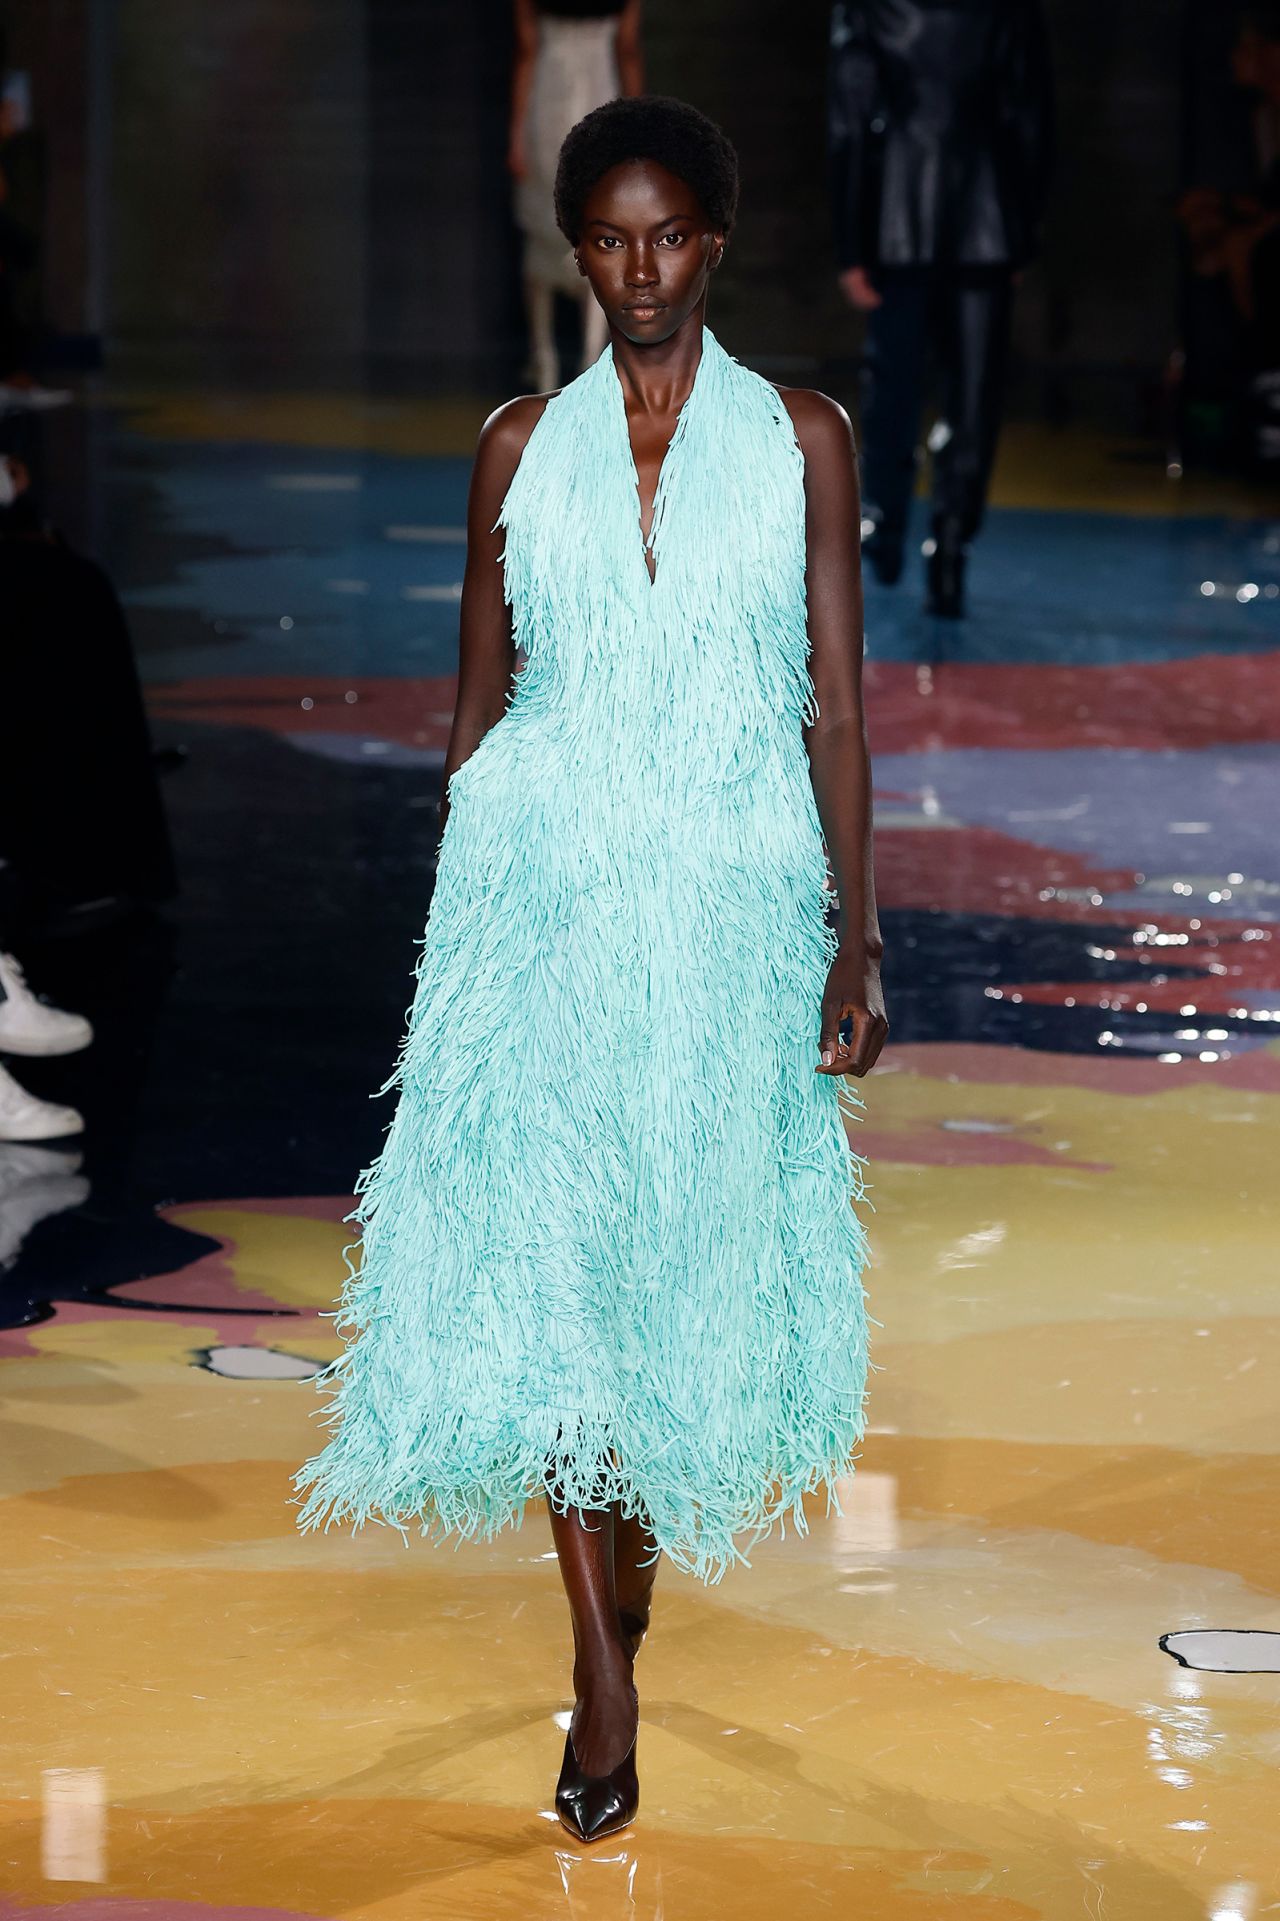 The final look from the Bottega Veneta catwalk was a turquoise fringed dress.